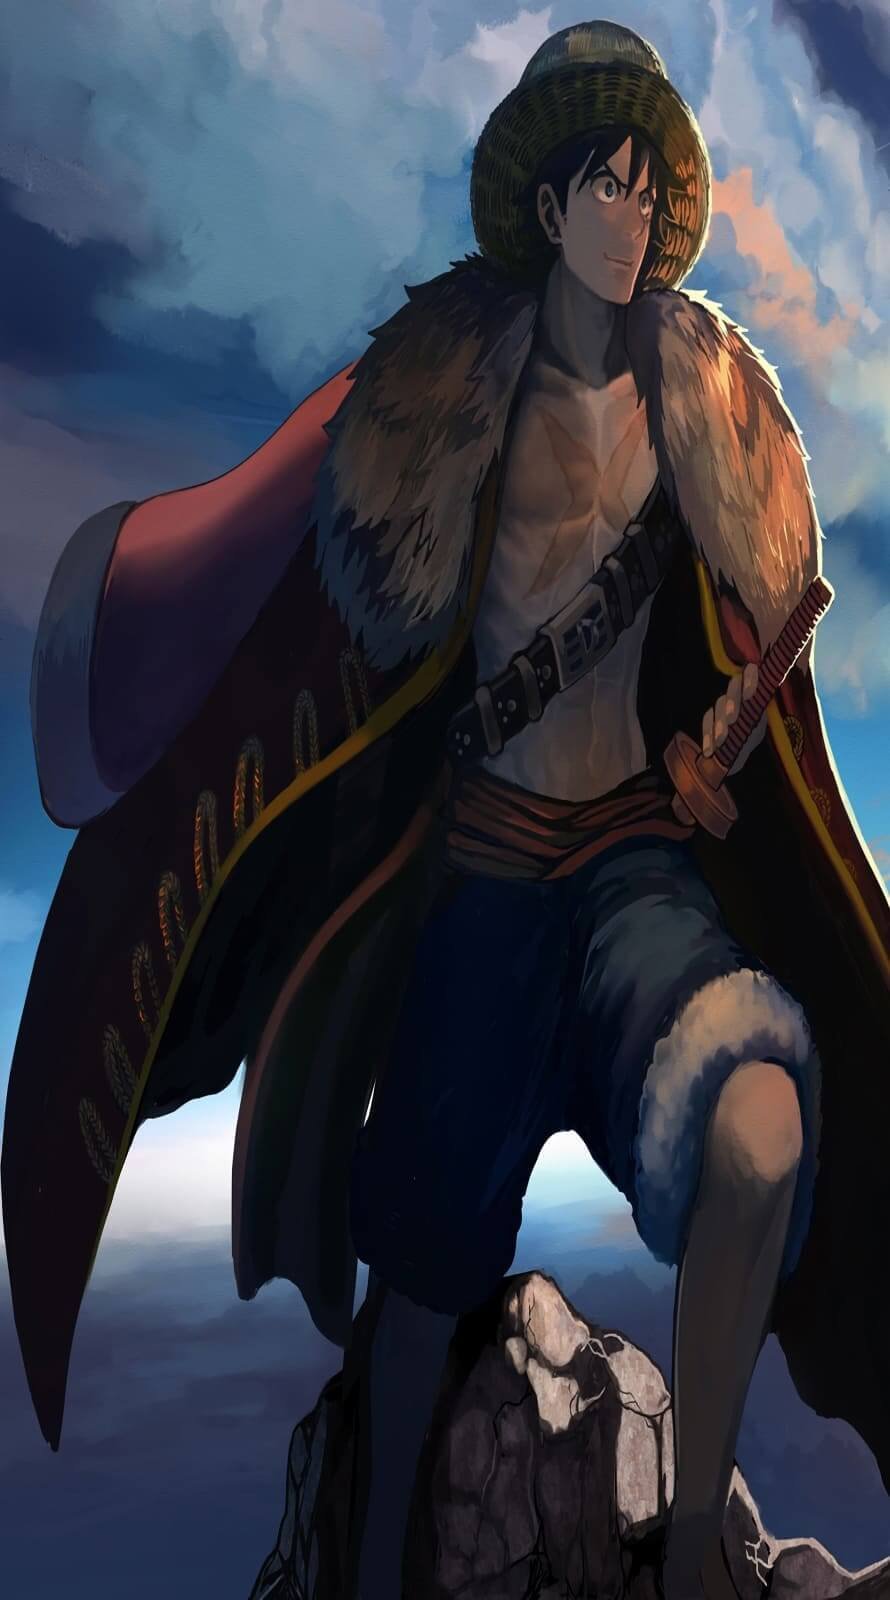 4k Monkey D Luffy One Piece Anime Character Iphone 14 Pro Wallpaper 5 Iphone 13 Pro Max Wallpaper Iphone 12 Background Iphone Wallpaper Iphone Backgrounds Wallpapersupdate Best Iphone Wallpapers And Iphone Backgrounds